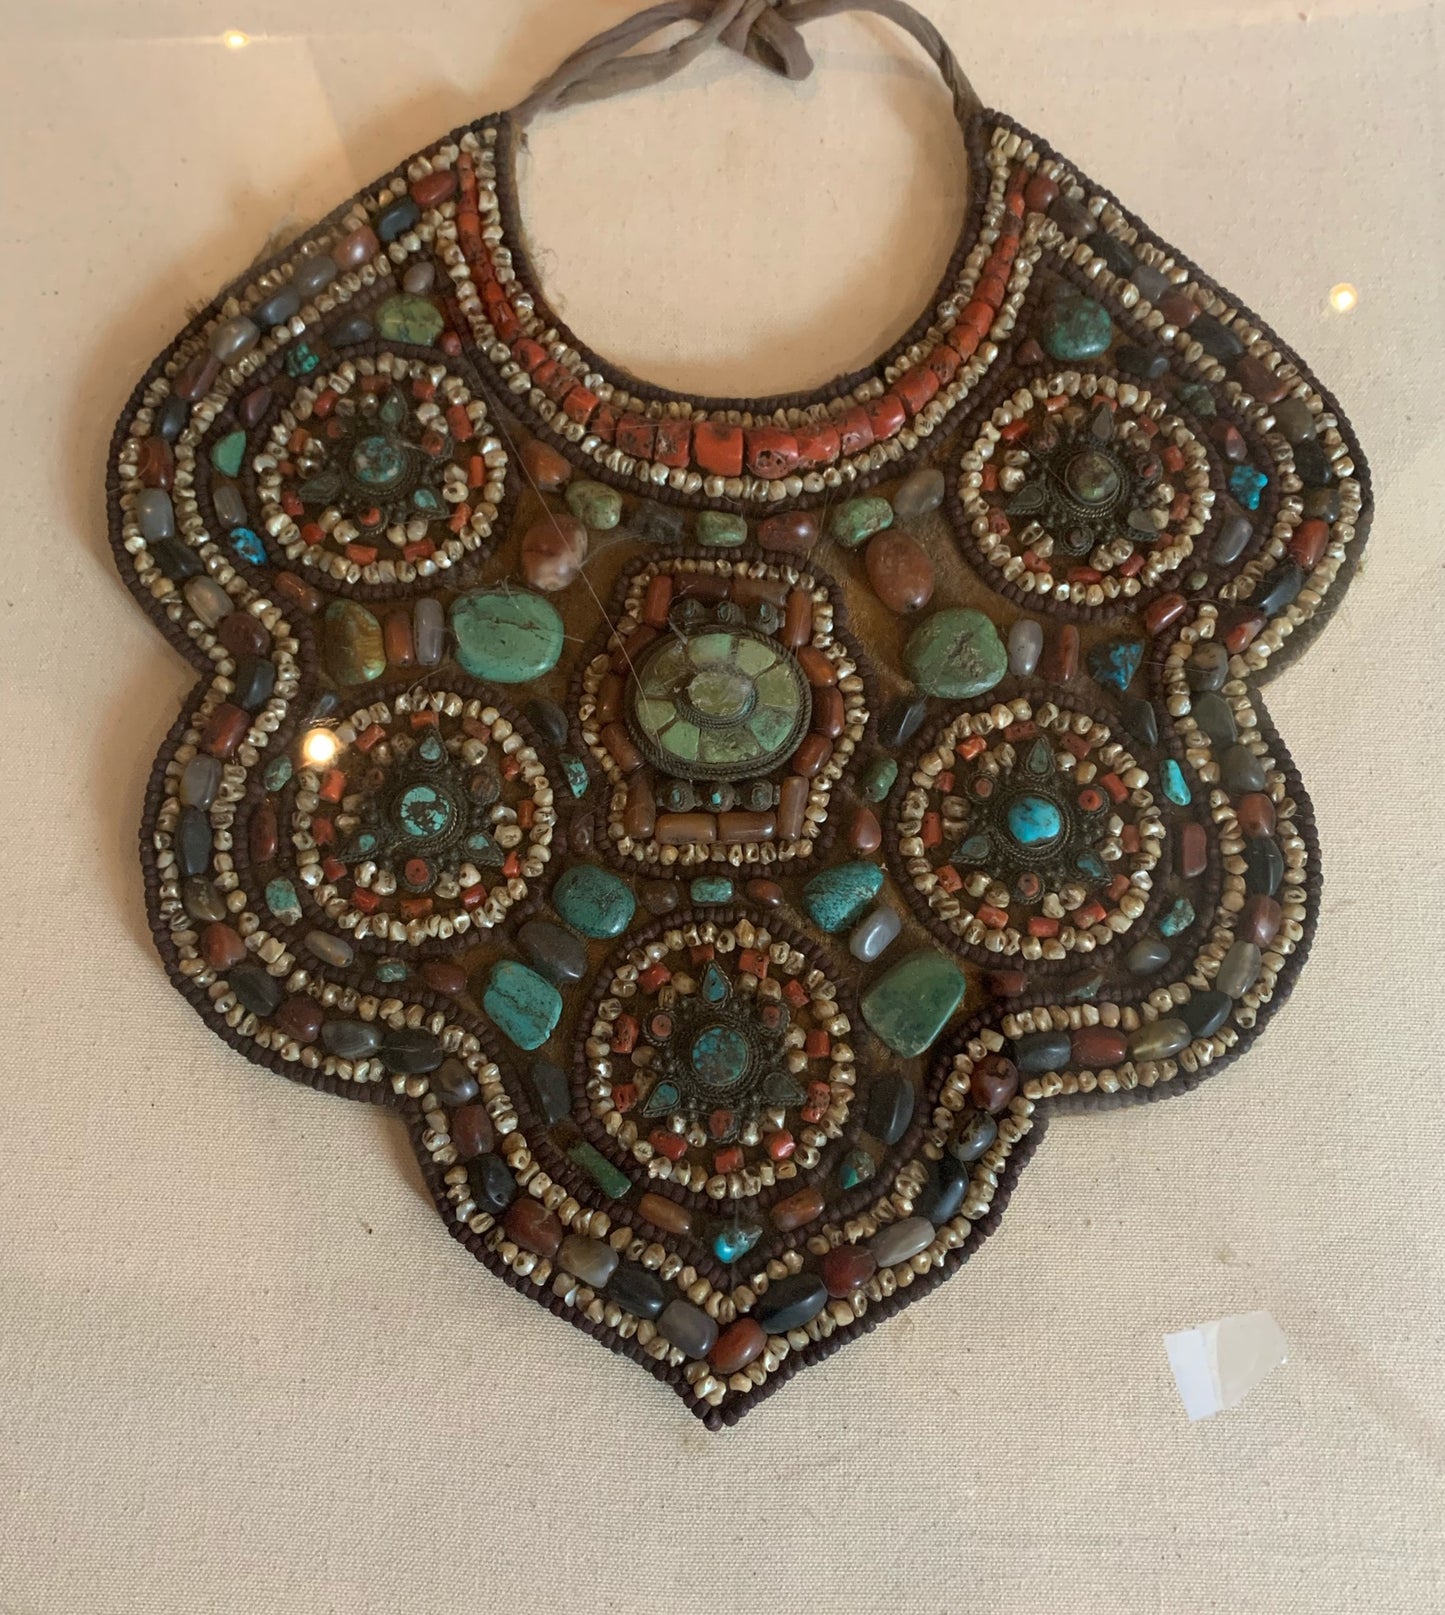 A necklace / breastplate from Ladakh